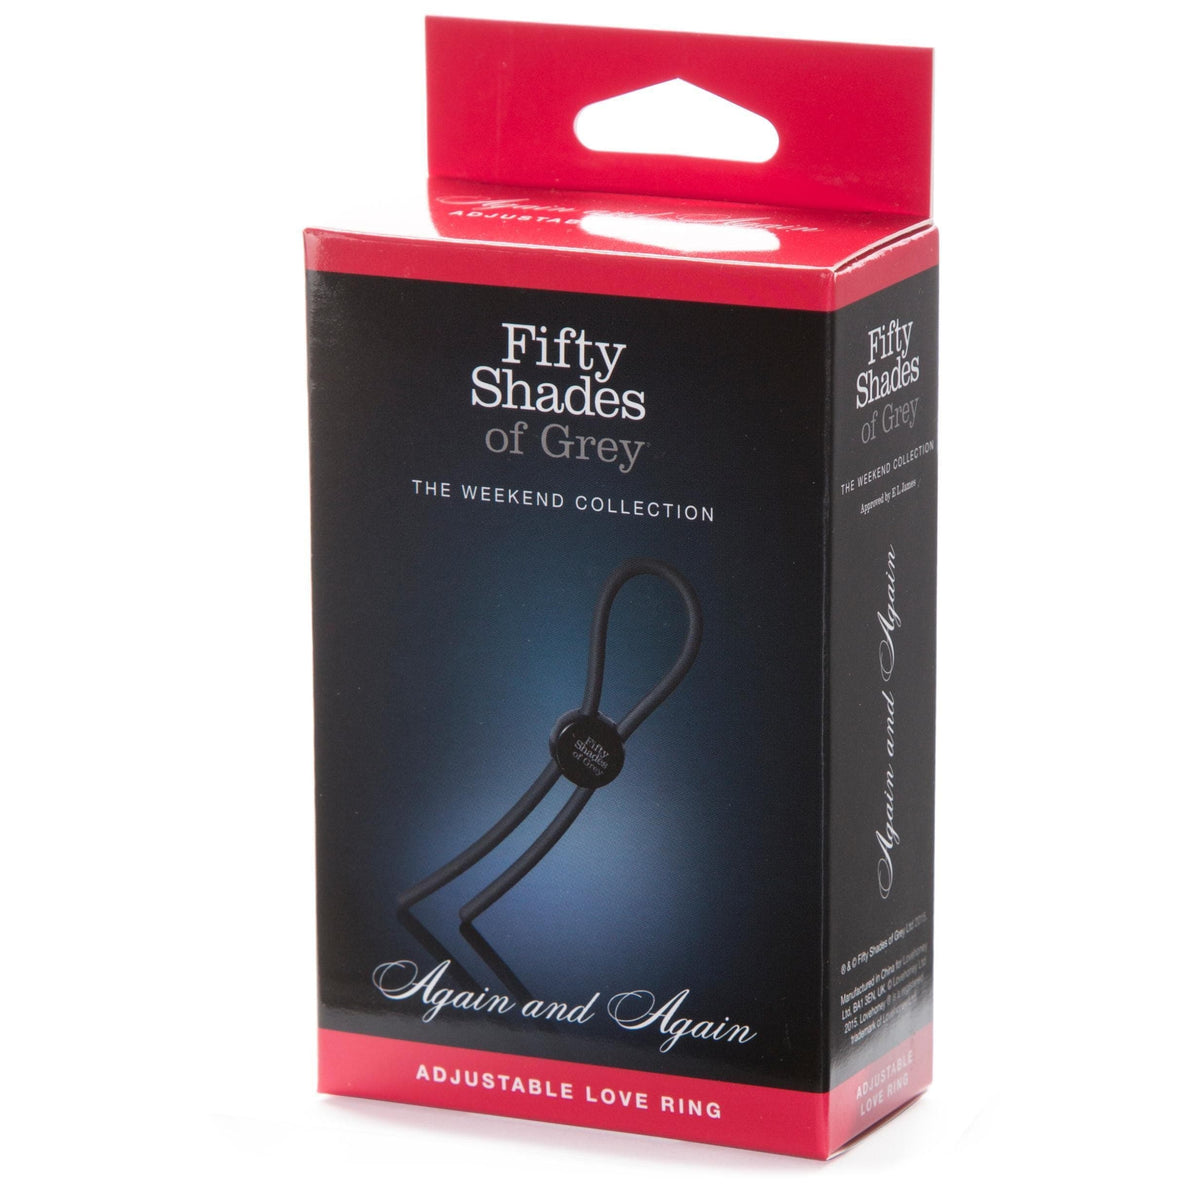 buy fifty shades of grey toys online